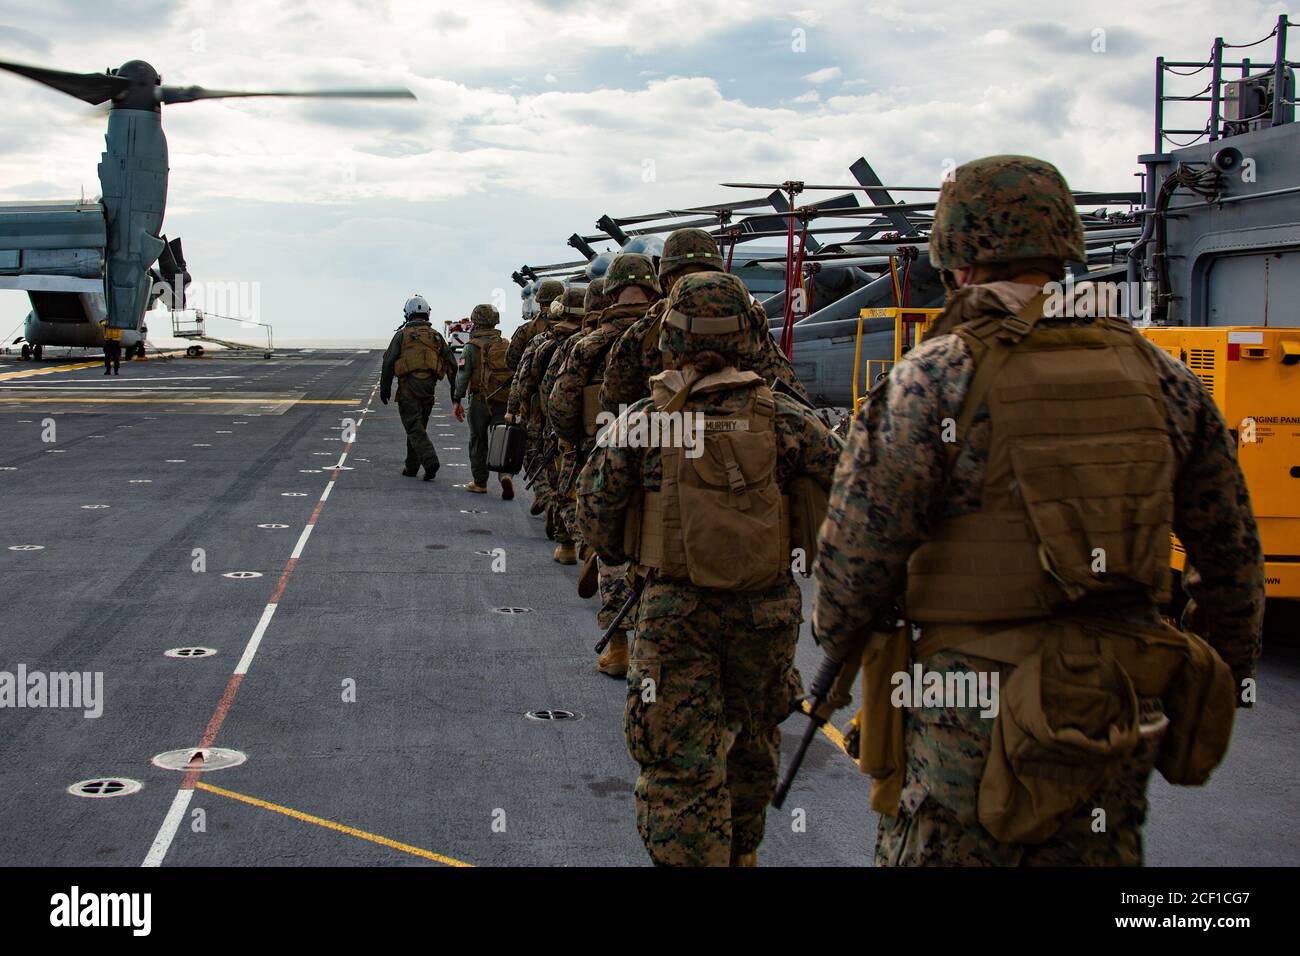 PHILIPPINE SEA (Sep. 2, 2020) Marines with the Forward Command Element (FCE), 31st Marine Expeditionary Unit (MEU), board a MV-22B Osprey with Marine Medium Tiltrotor Squadron 262 (Reinforced), for an embassy reinforcement drill, aboard amphibious assault ship USS America (LHA 6). The FCE is prepared to deploy to U.S. embassies in the region in order to establish communication and coordination with the MEU for follow on missions. The America, flagship of the America Amphibious Ready Group, 31st MEU team, is operating in the U.S. 7th Fleet area of operations to enhance interoperability with all Stock Photo